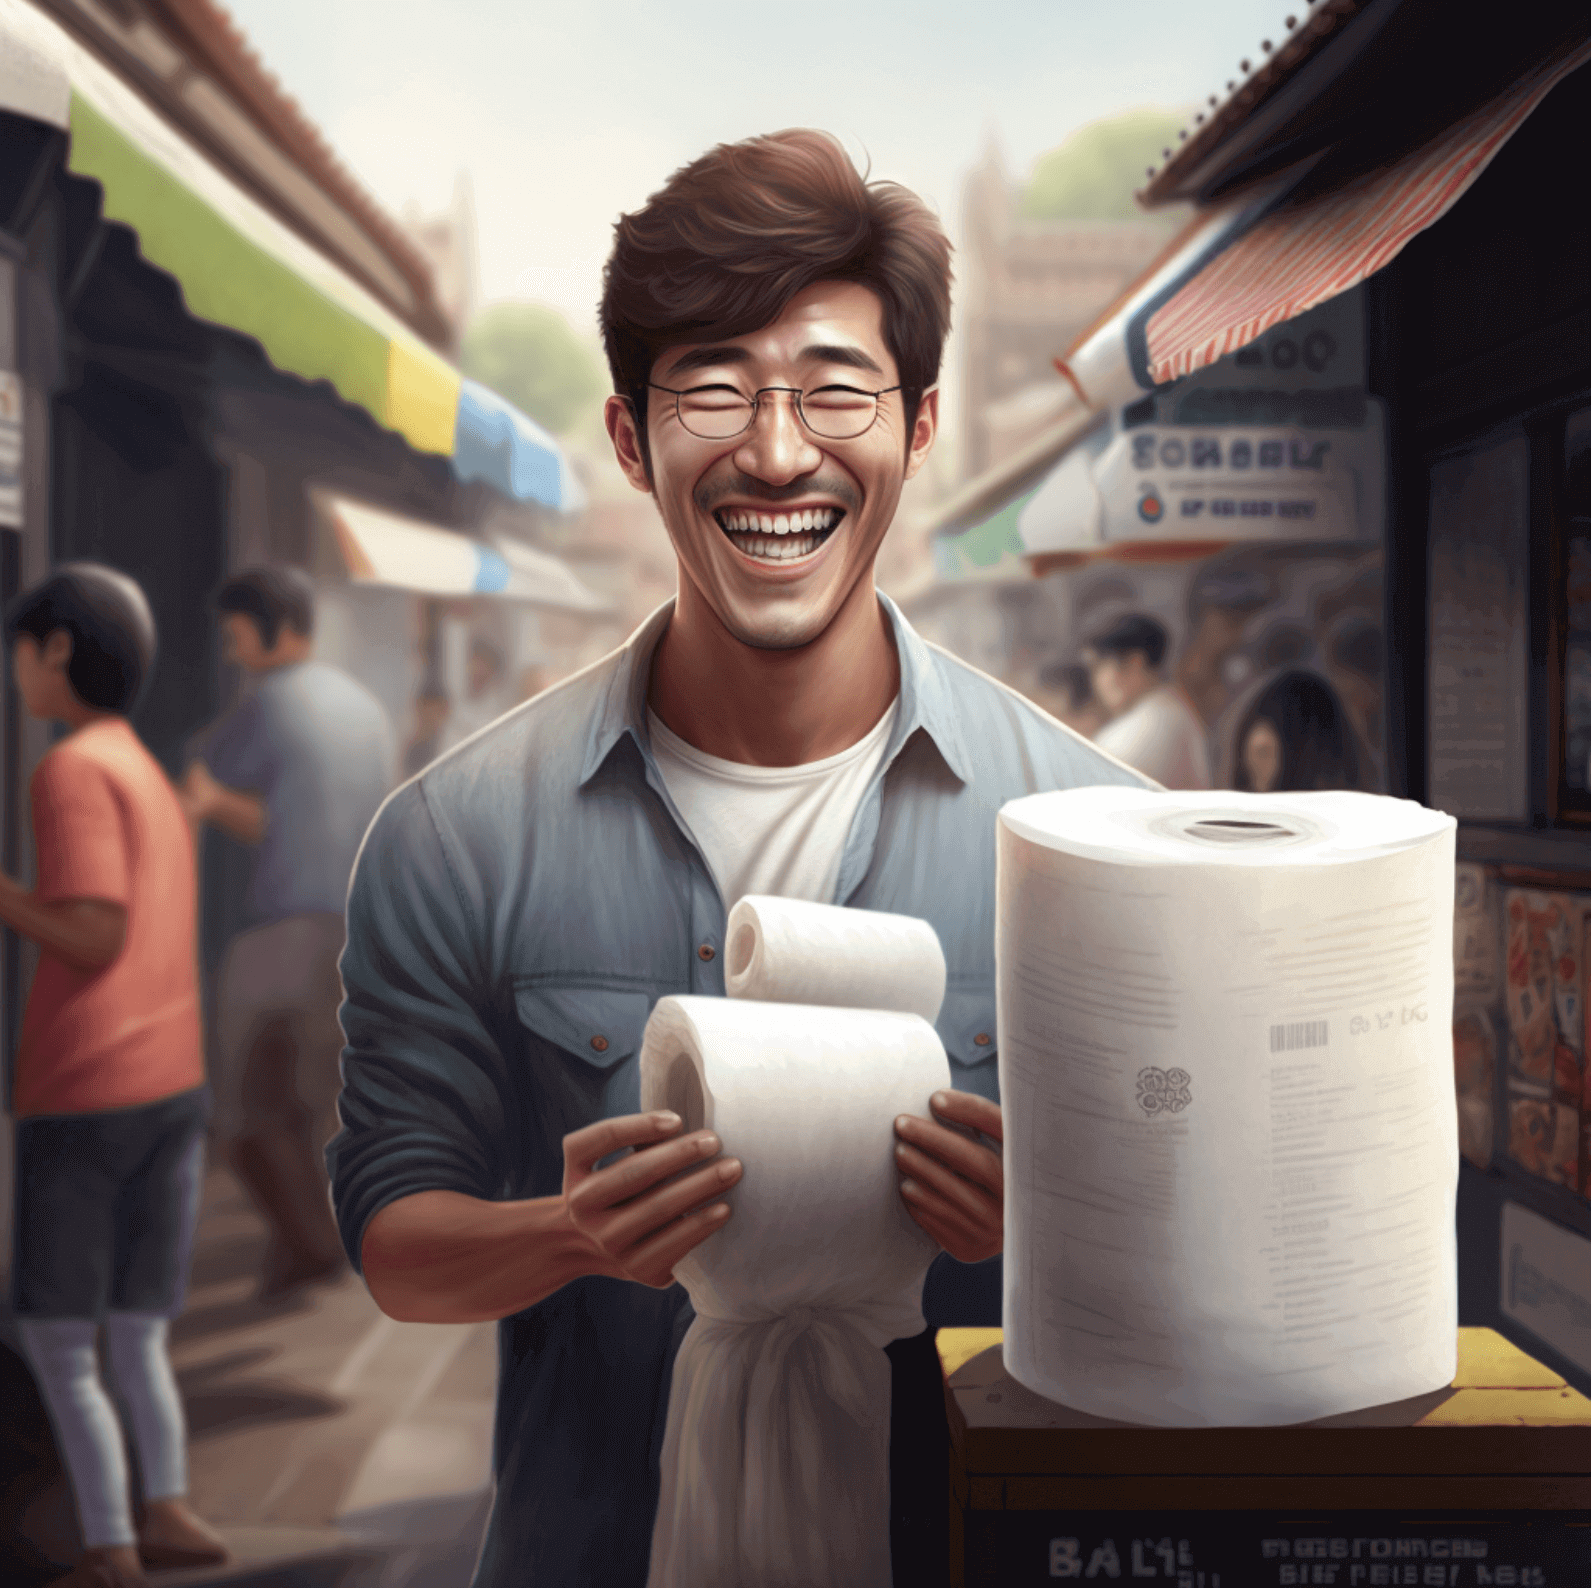 A guy standing in front of a street vendor, holding toilet paper.